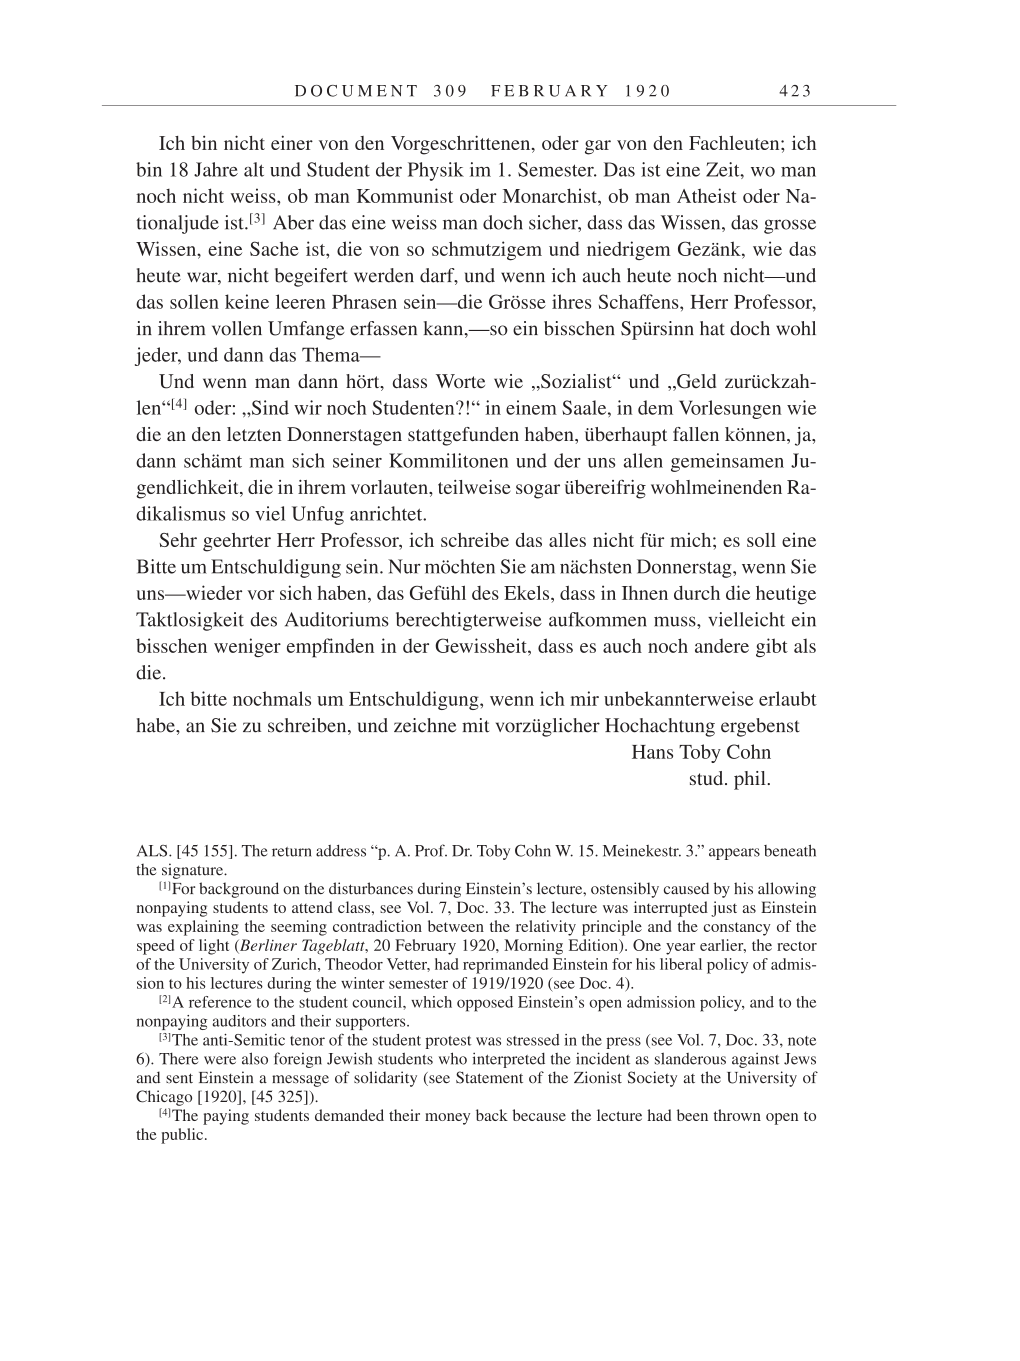 Volume 9: The Berlin Years: Correspondence January 1919-April 1920 page 423